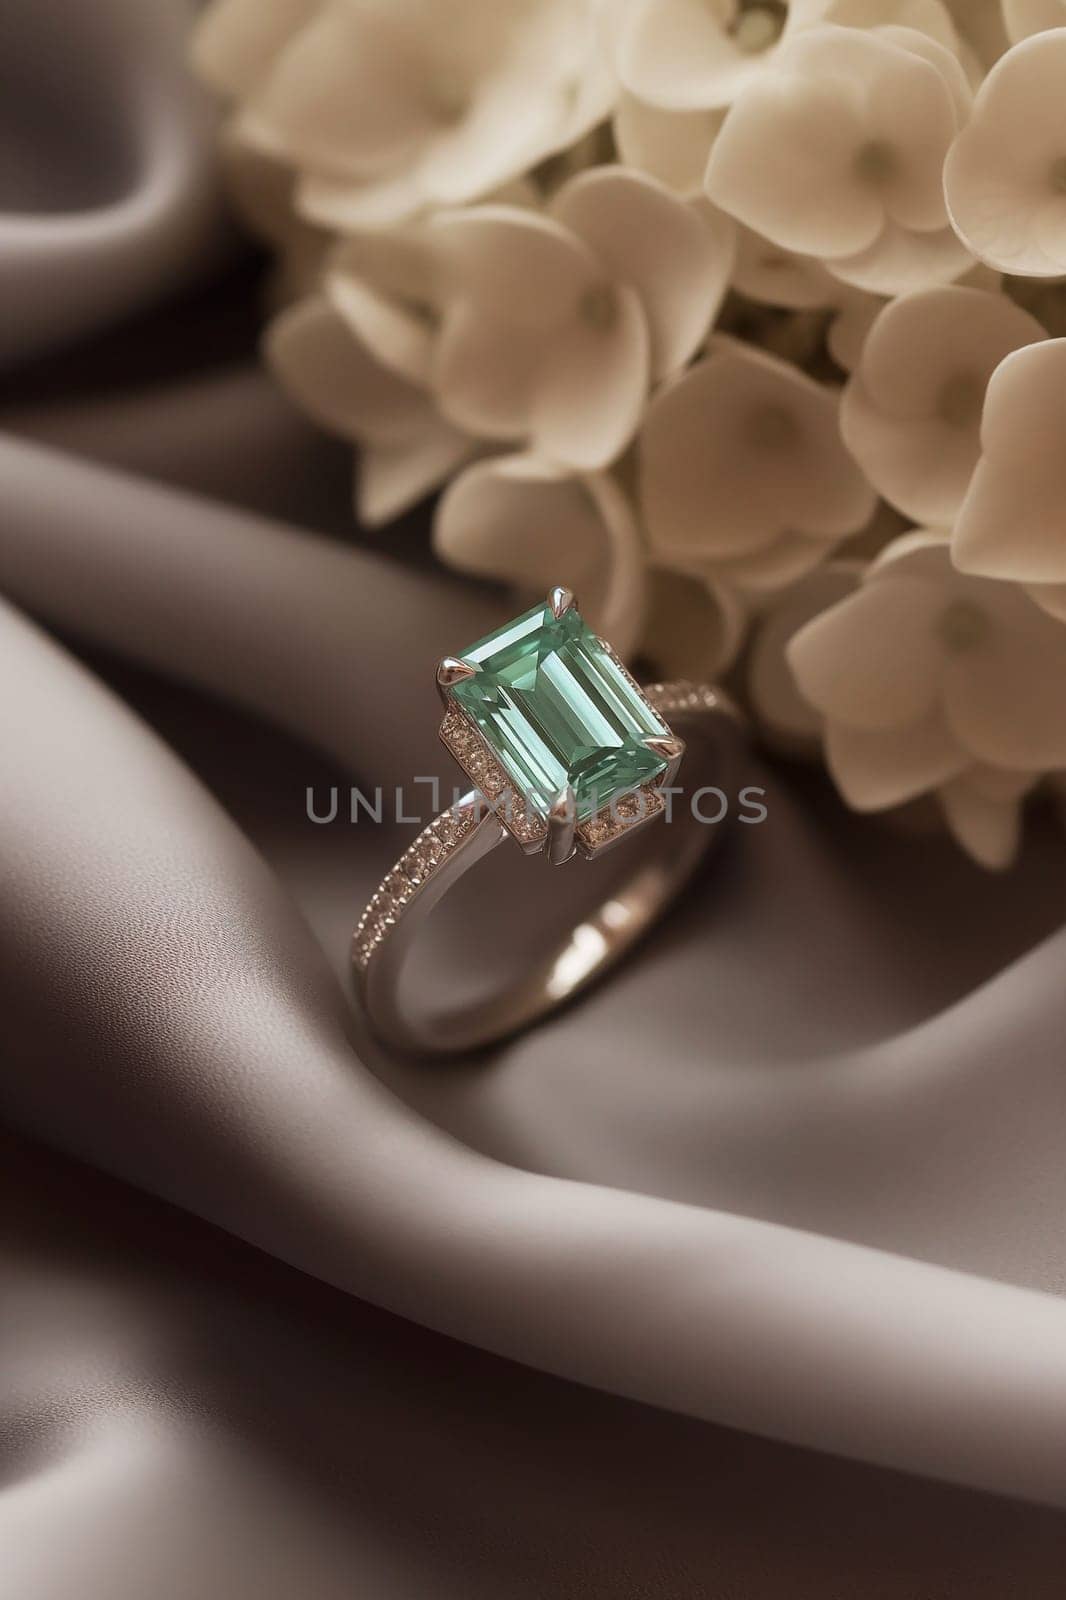 Elegant ring with emerald center stone and diamond accents surrounded by white flowers by Hype2art